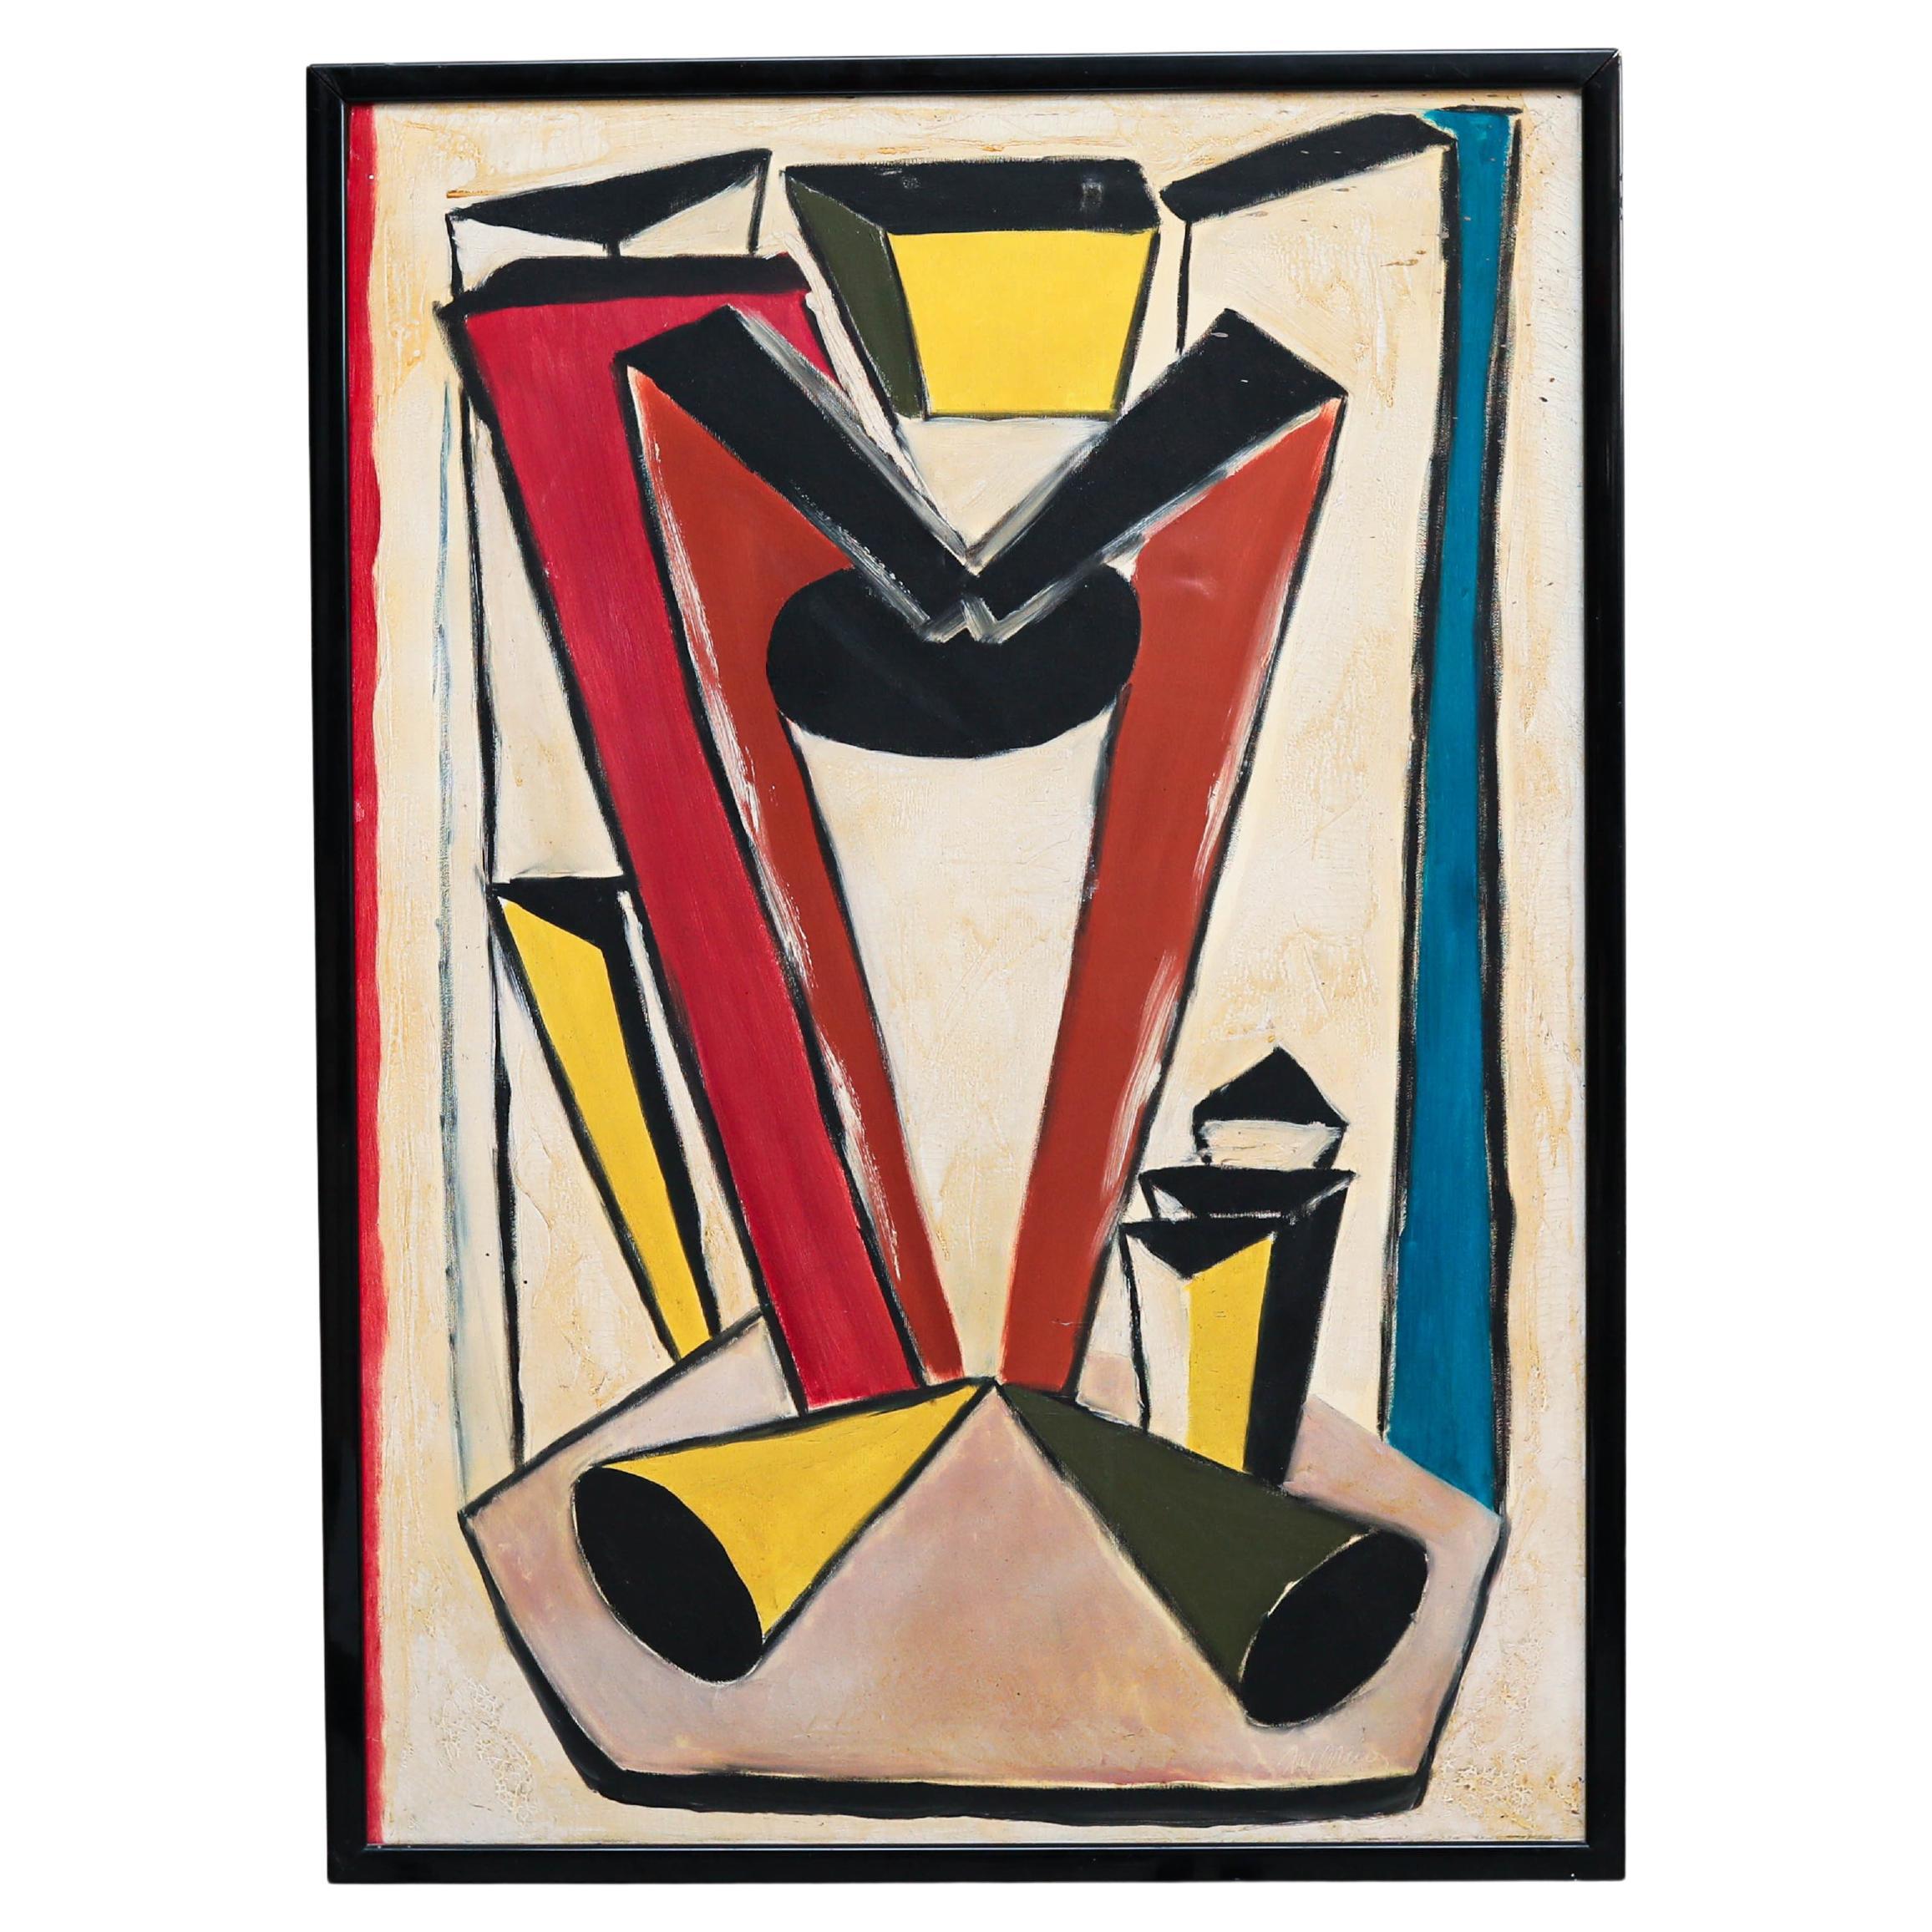 Painting in the style of Fernand Leger, circa 1970.

Painted on canvas. 

In original condition, with some visible signs of previous use and age, preserving a beautiful patina.
It has a scratch, hole as shown on the